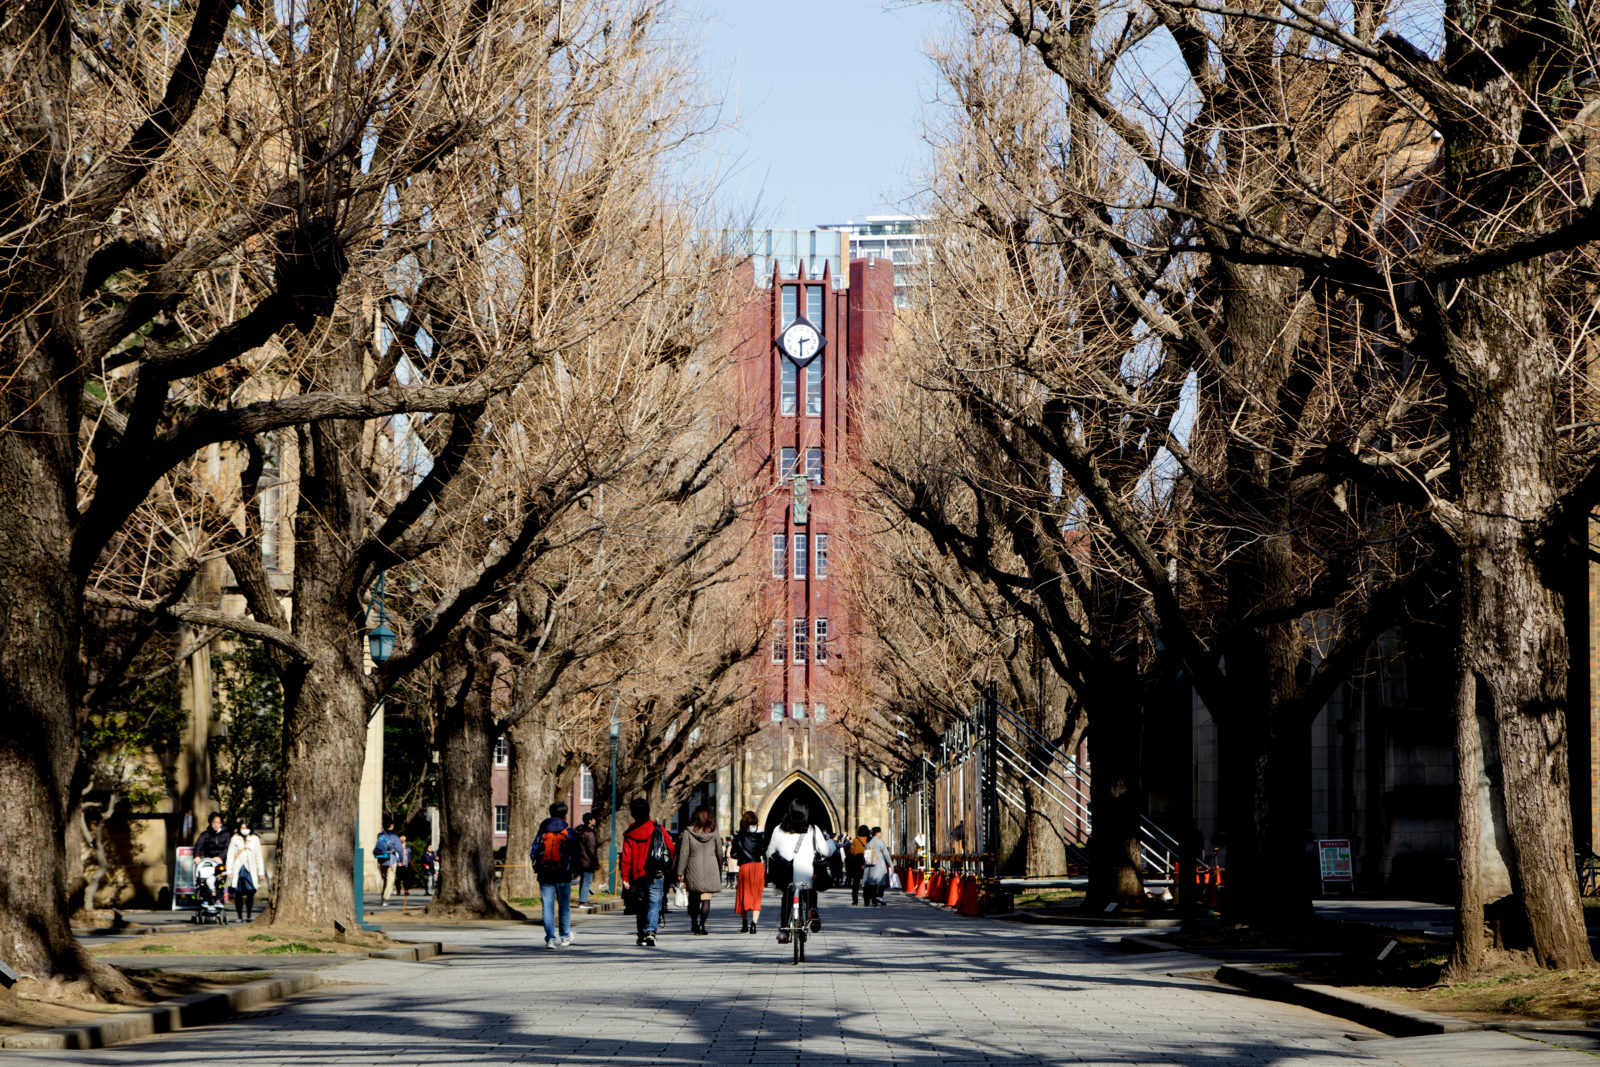 Bunkyo, Tokyo, Japan - The University of Tokyo is a public research university located in Bunkyo, Tokyo.